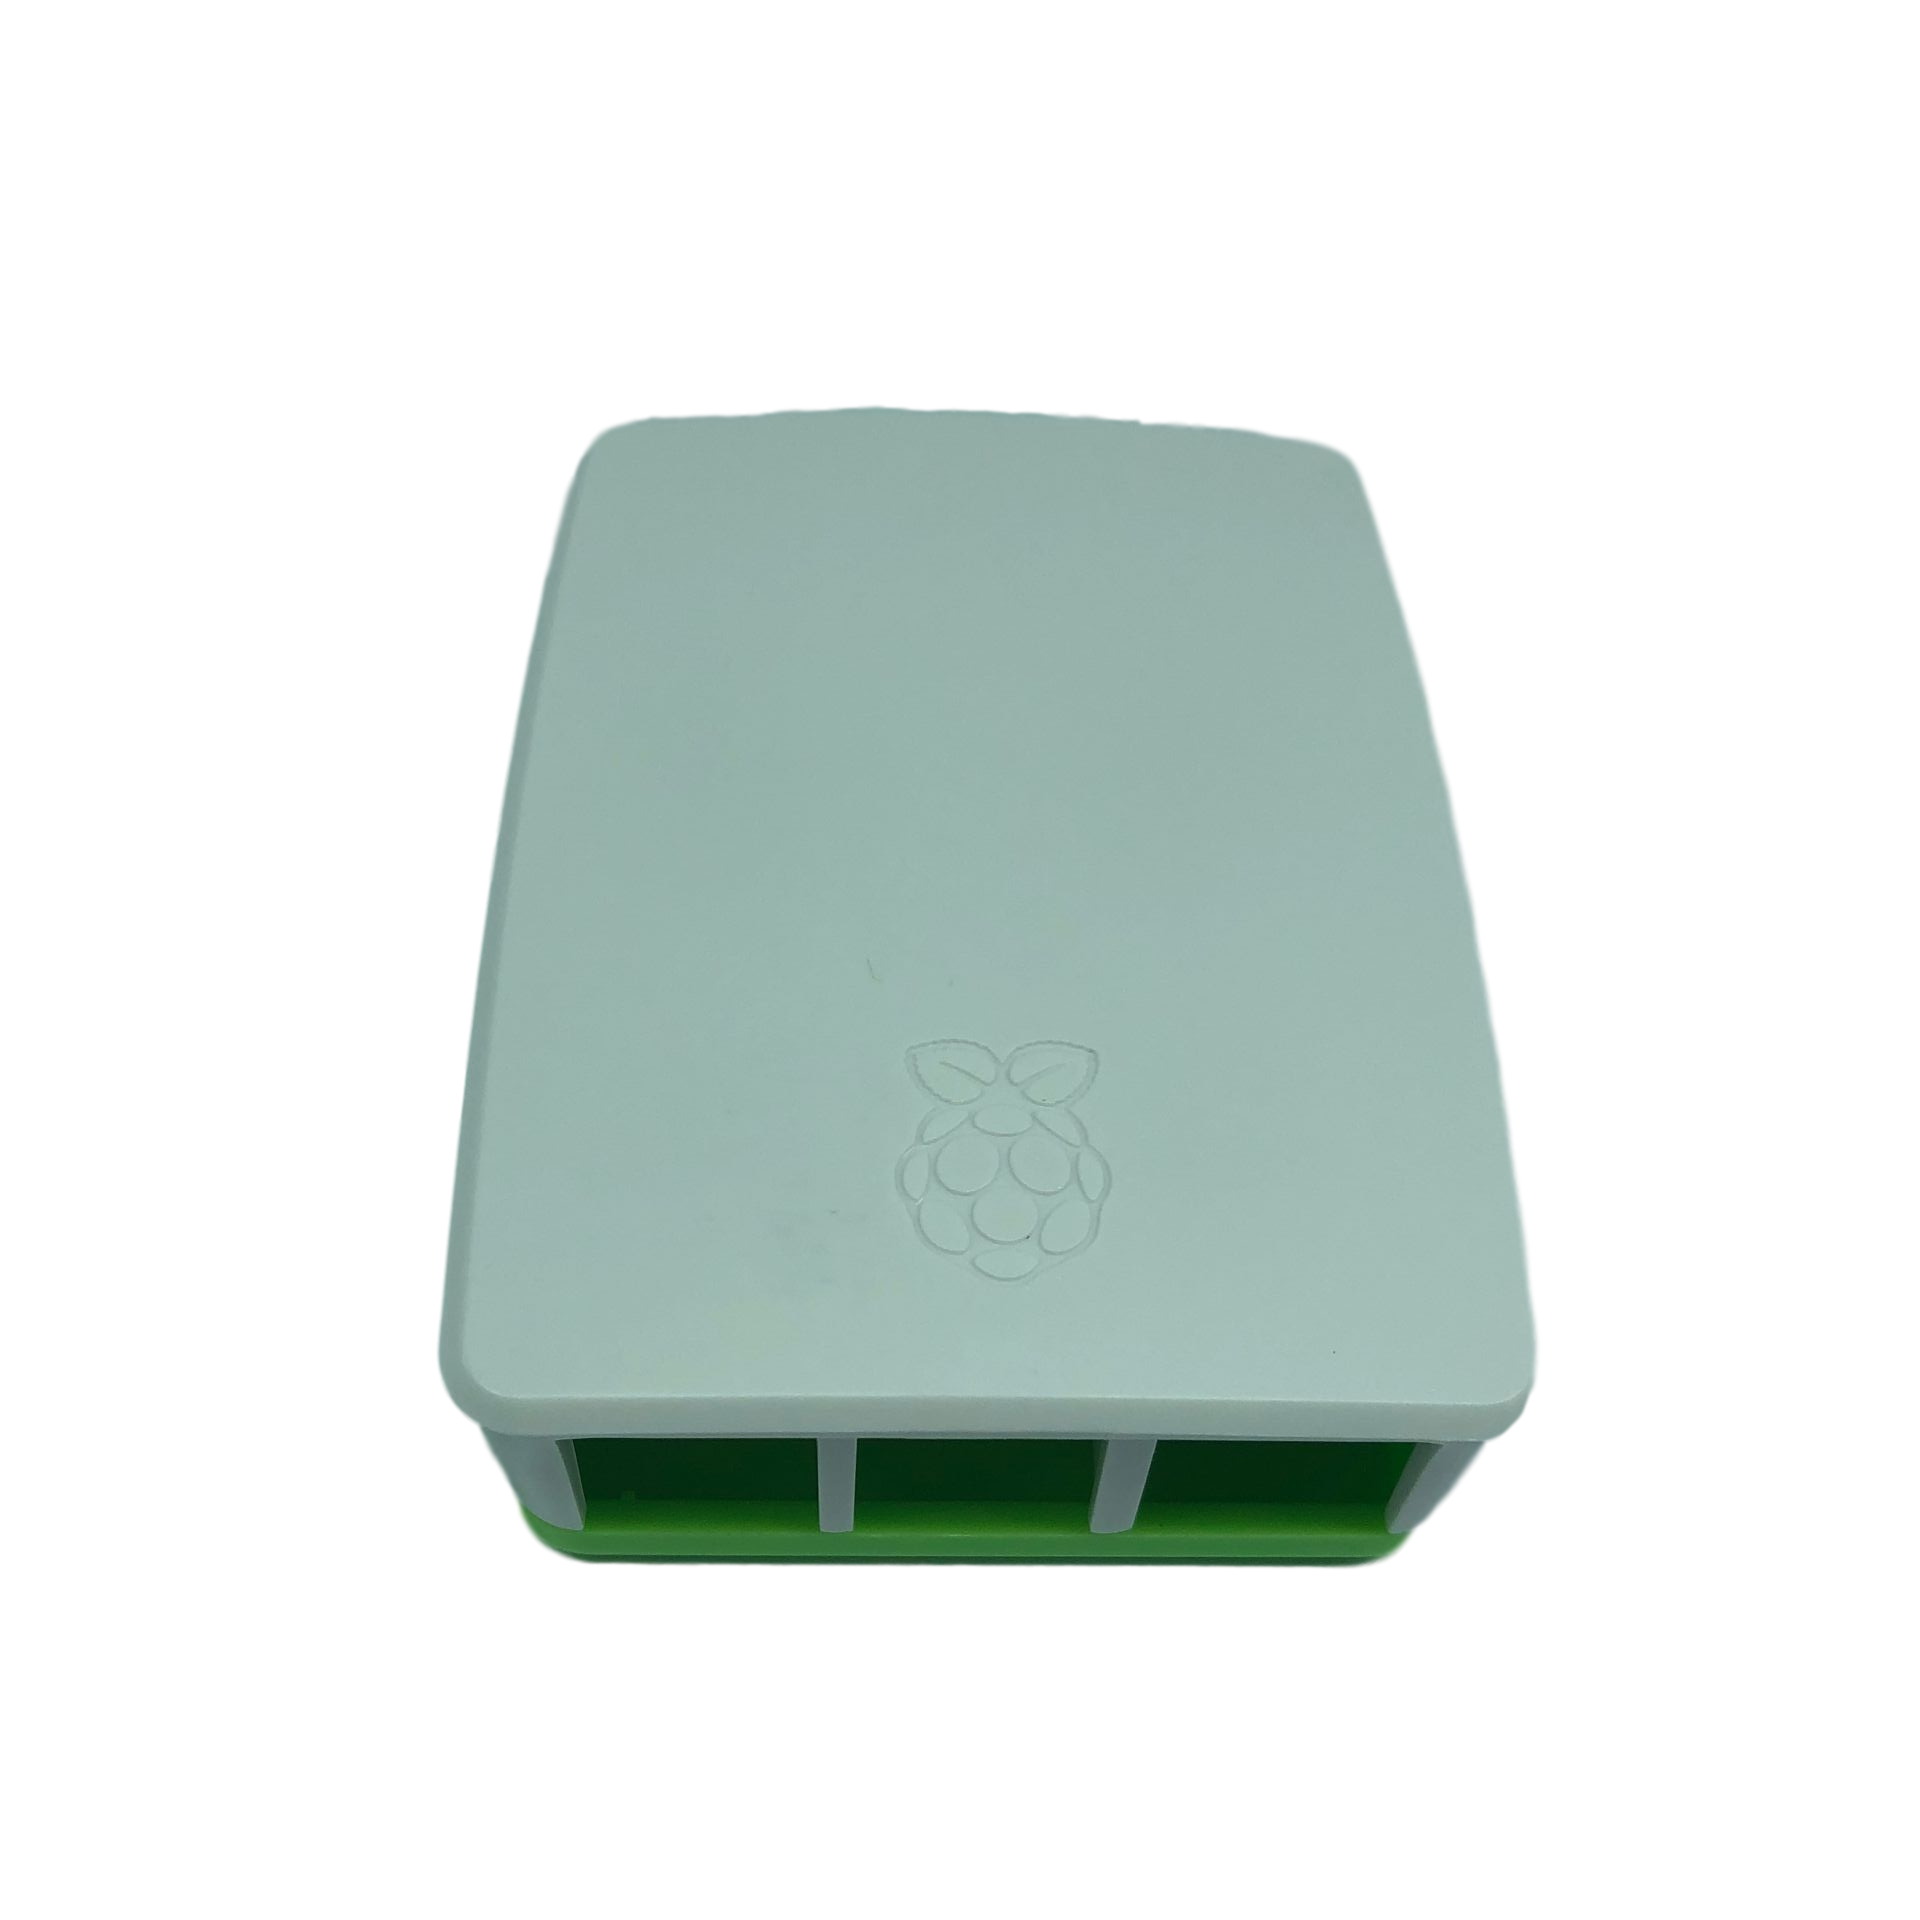 Official-Protective-Case-Classic-Green-White-Plastic-Box-for-Raspberry-Pi-4B-1738901